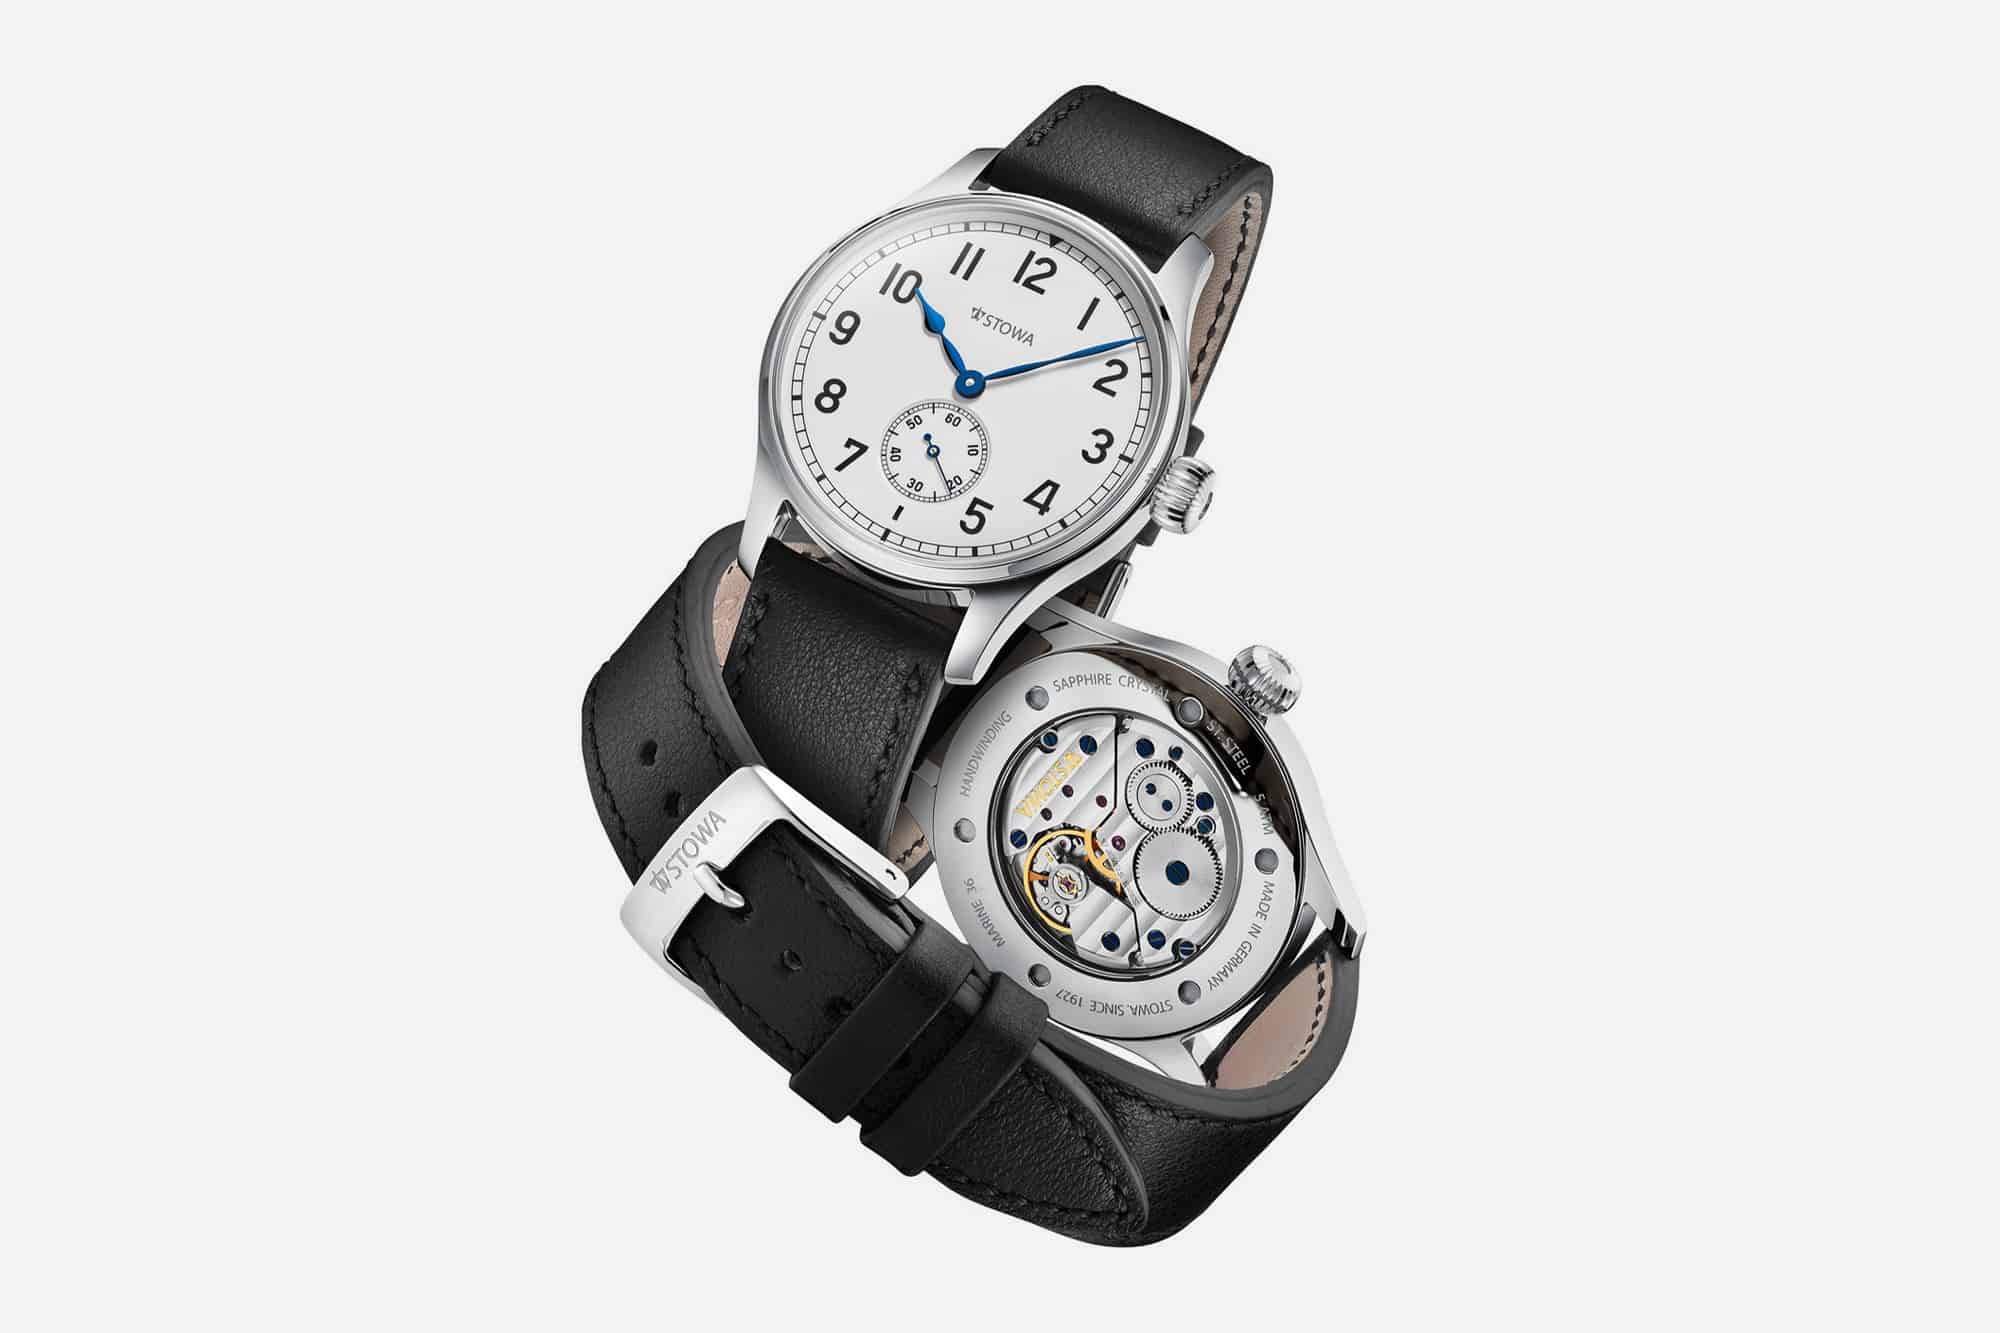 Introducing the Stowa Marine Classic 36 with a Hand Wound Movement